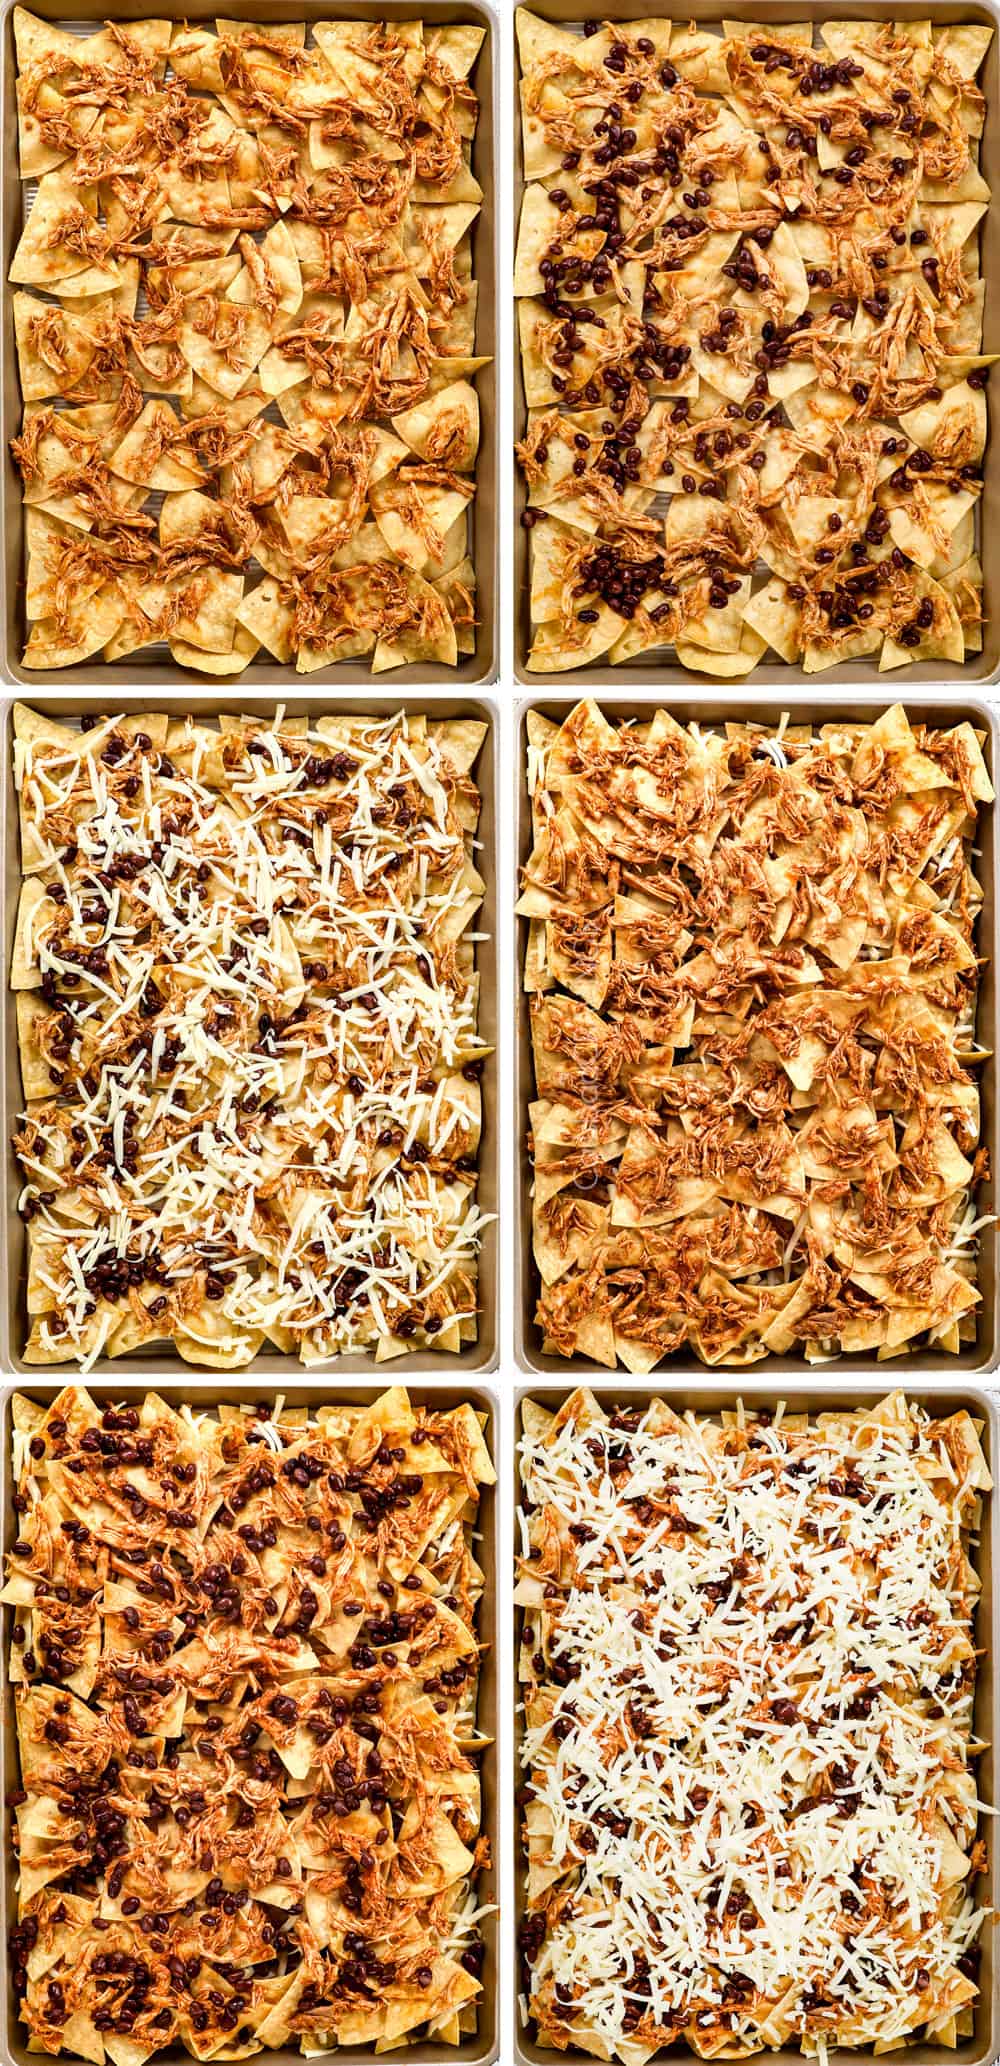 a collage showing how to make chicken nachos recipe by 1) layering chips and chicken, 2) layering beans, 3) layering cheese then repeating